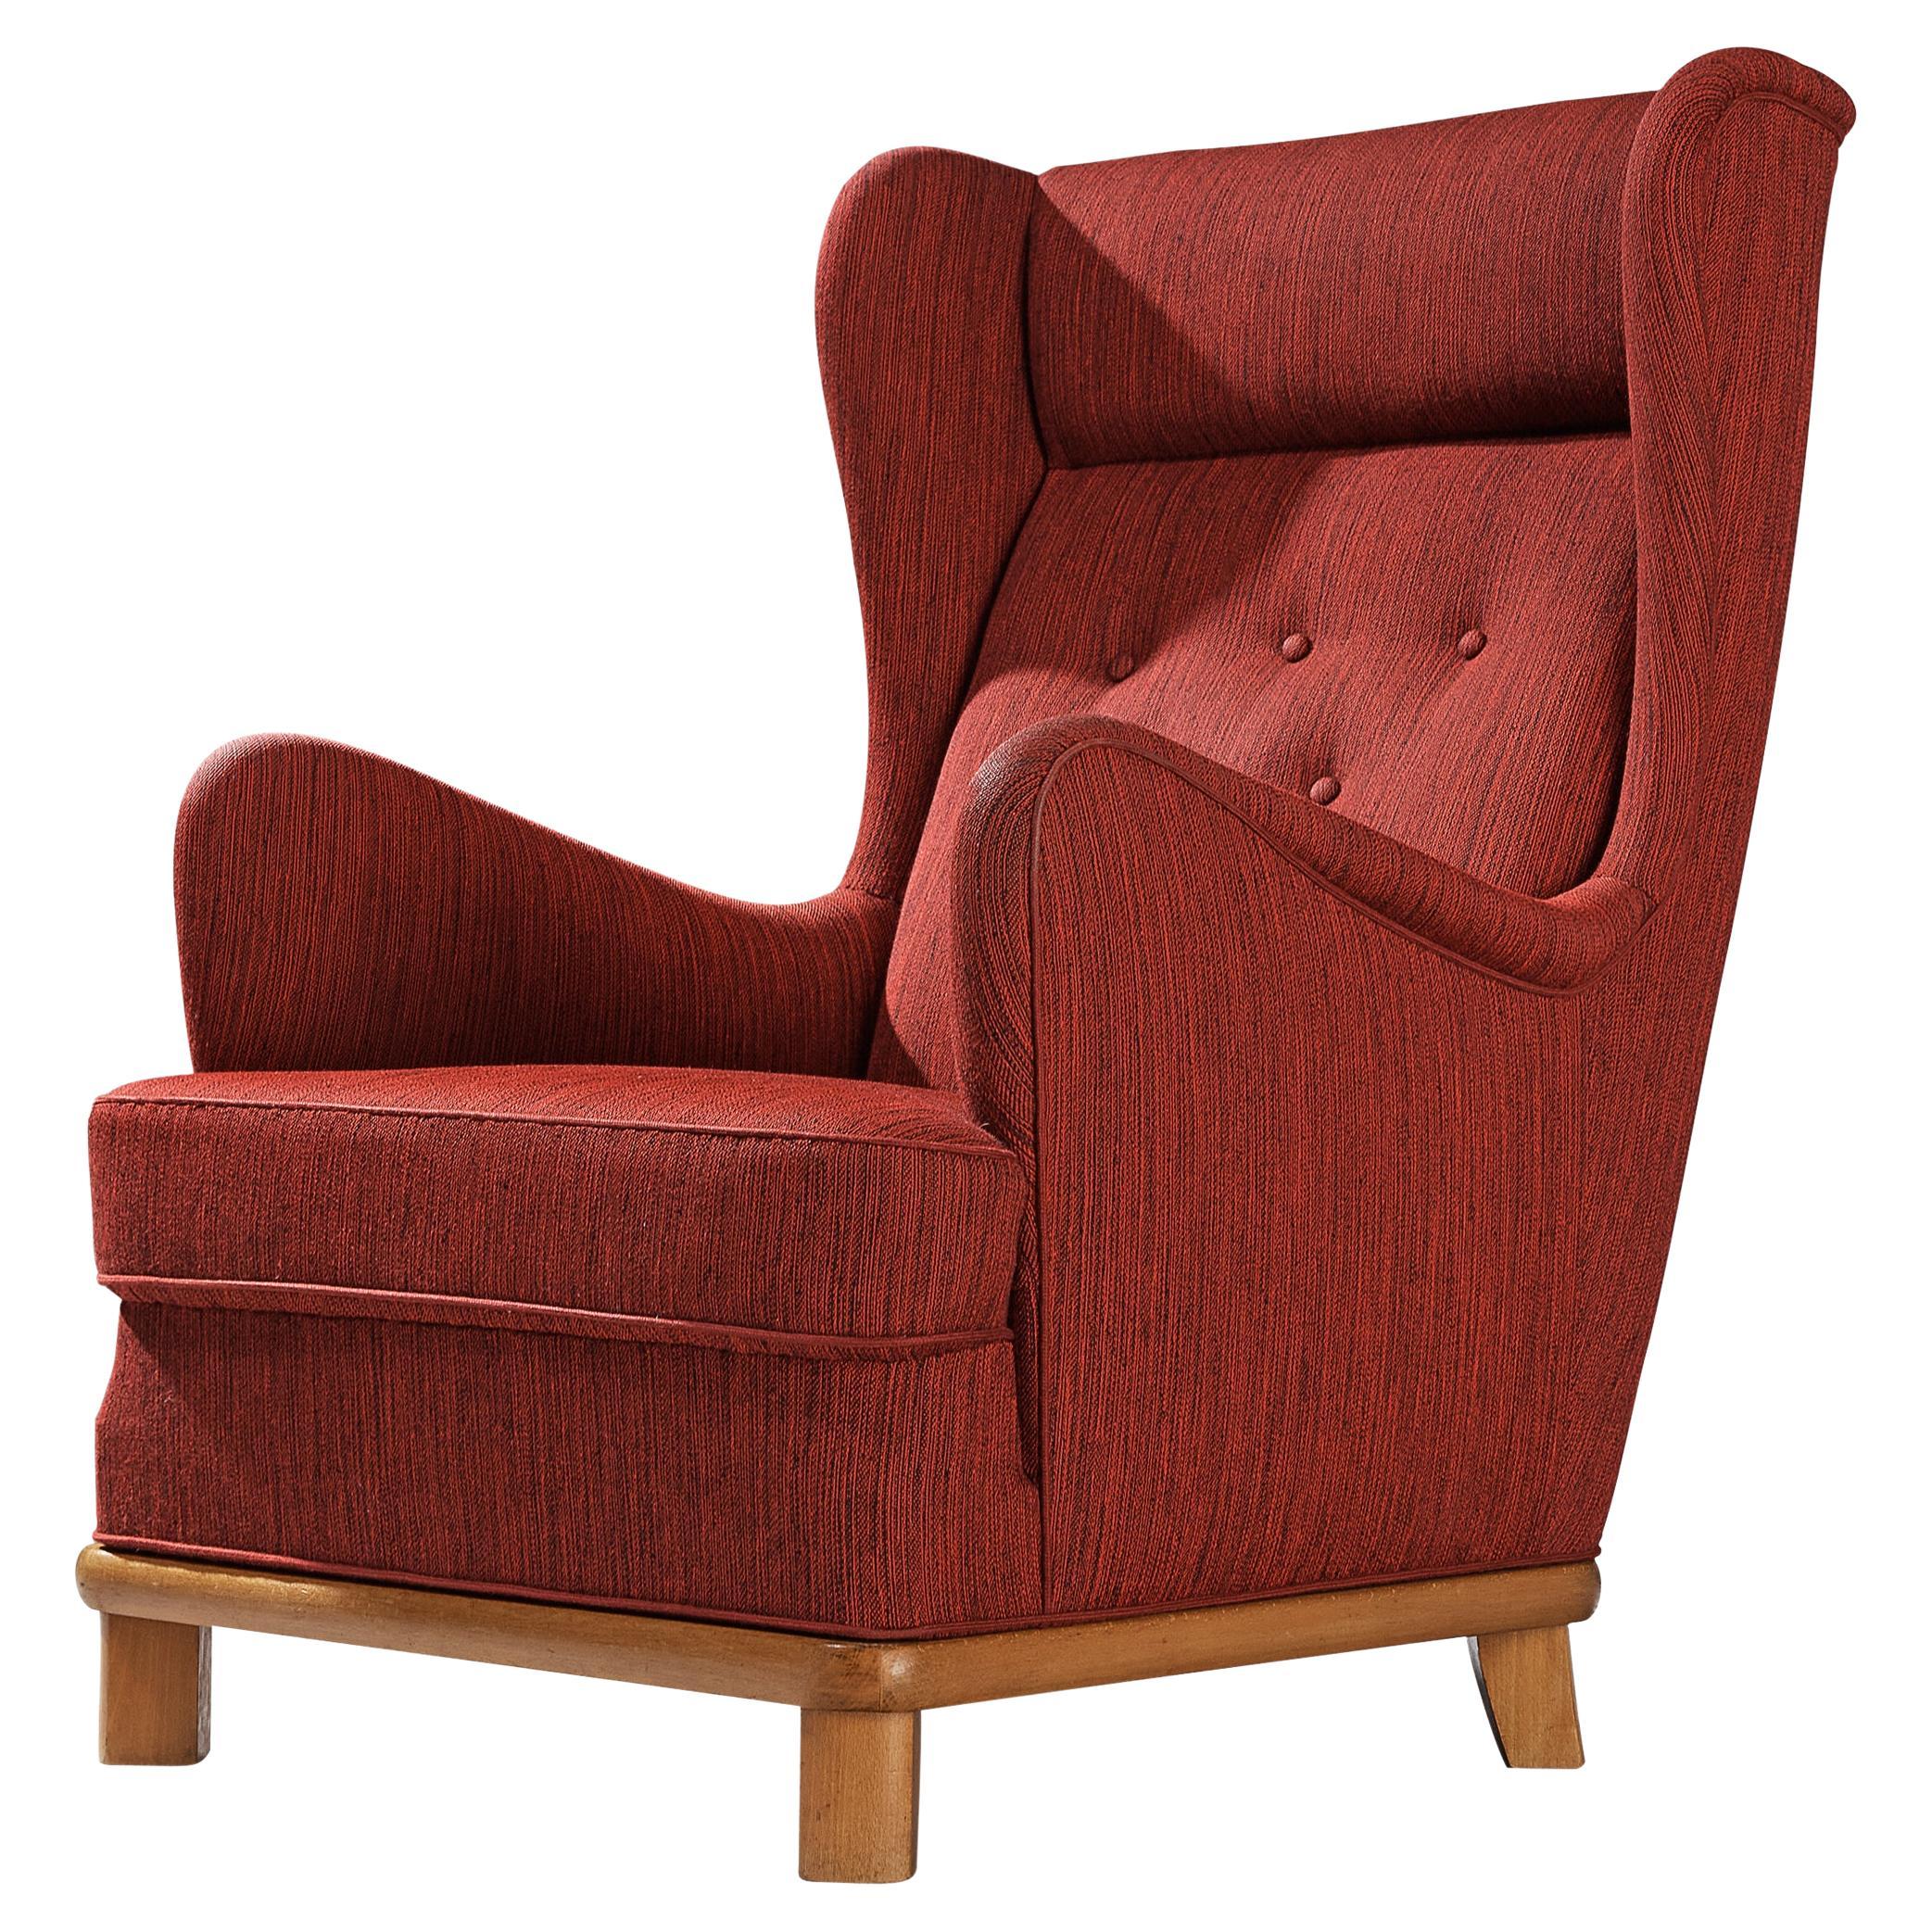 Easy chair, fabric, beech, Denmark, 1950s

This archetypical wingback chair of the 1950s is both extremely comfortable and pleasing to the eyes. The armchair is upholstered in a fine textured fabric, showing a mixture of black and red lines. The